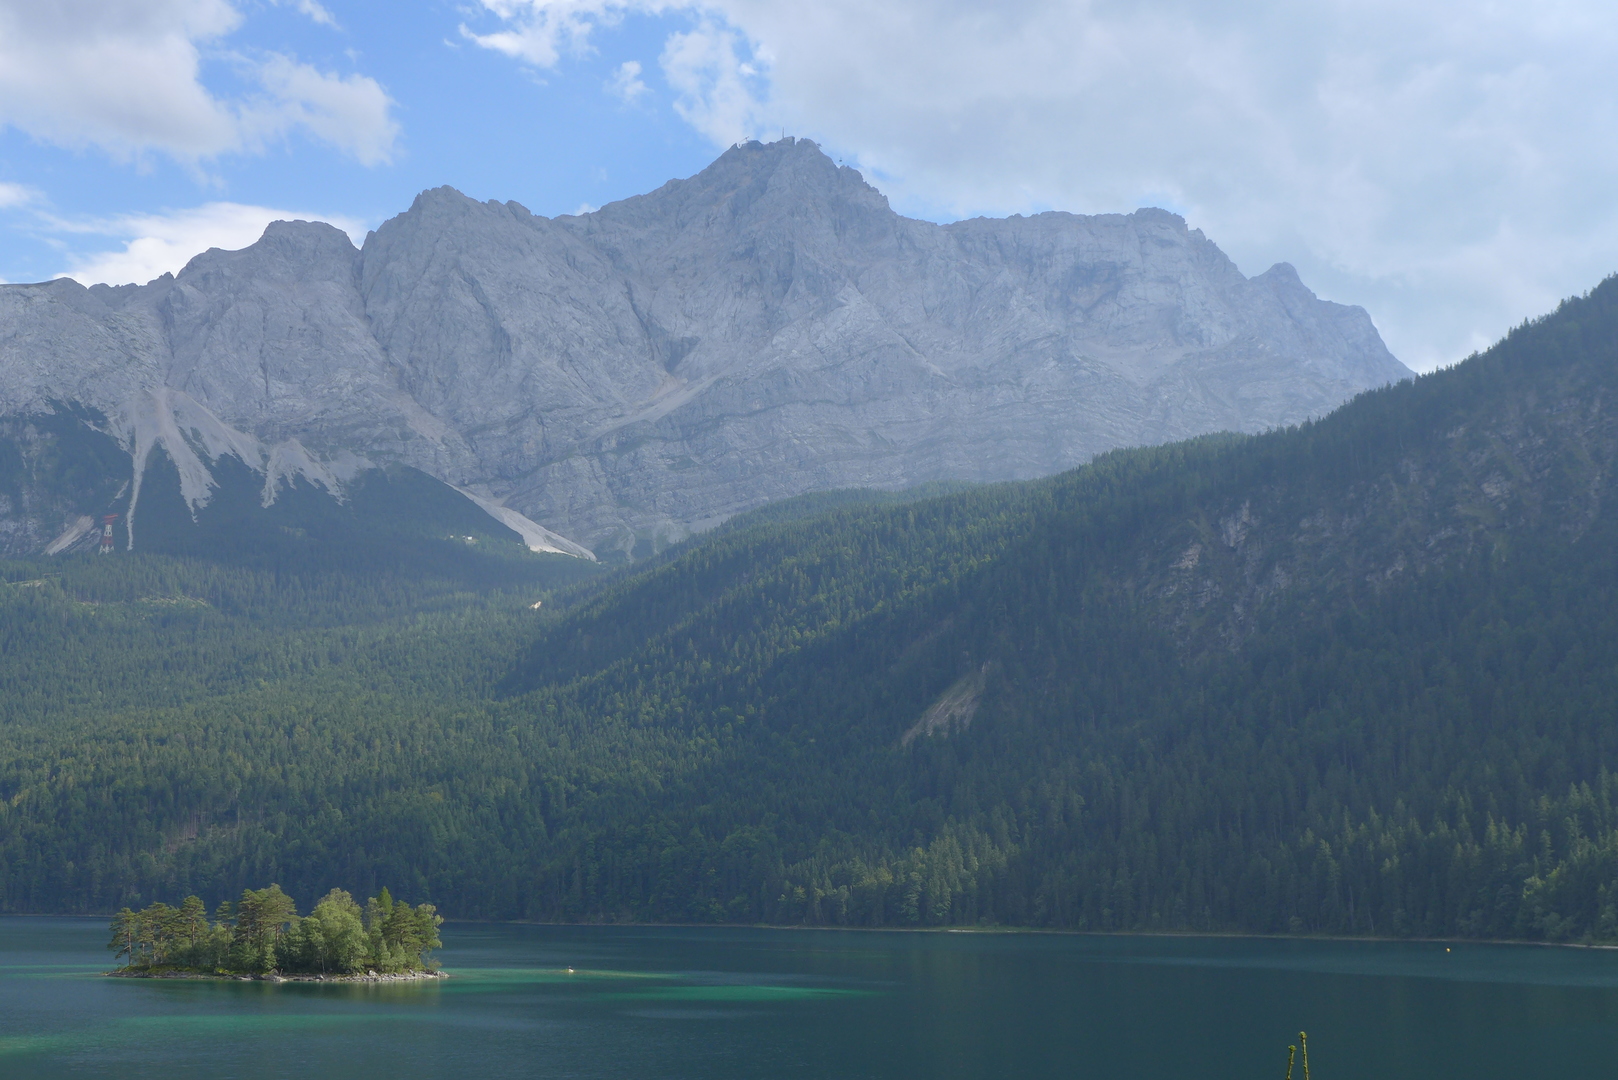 Zugspitze seen from Wankle by the Eibsee, August 2017